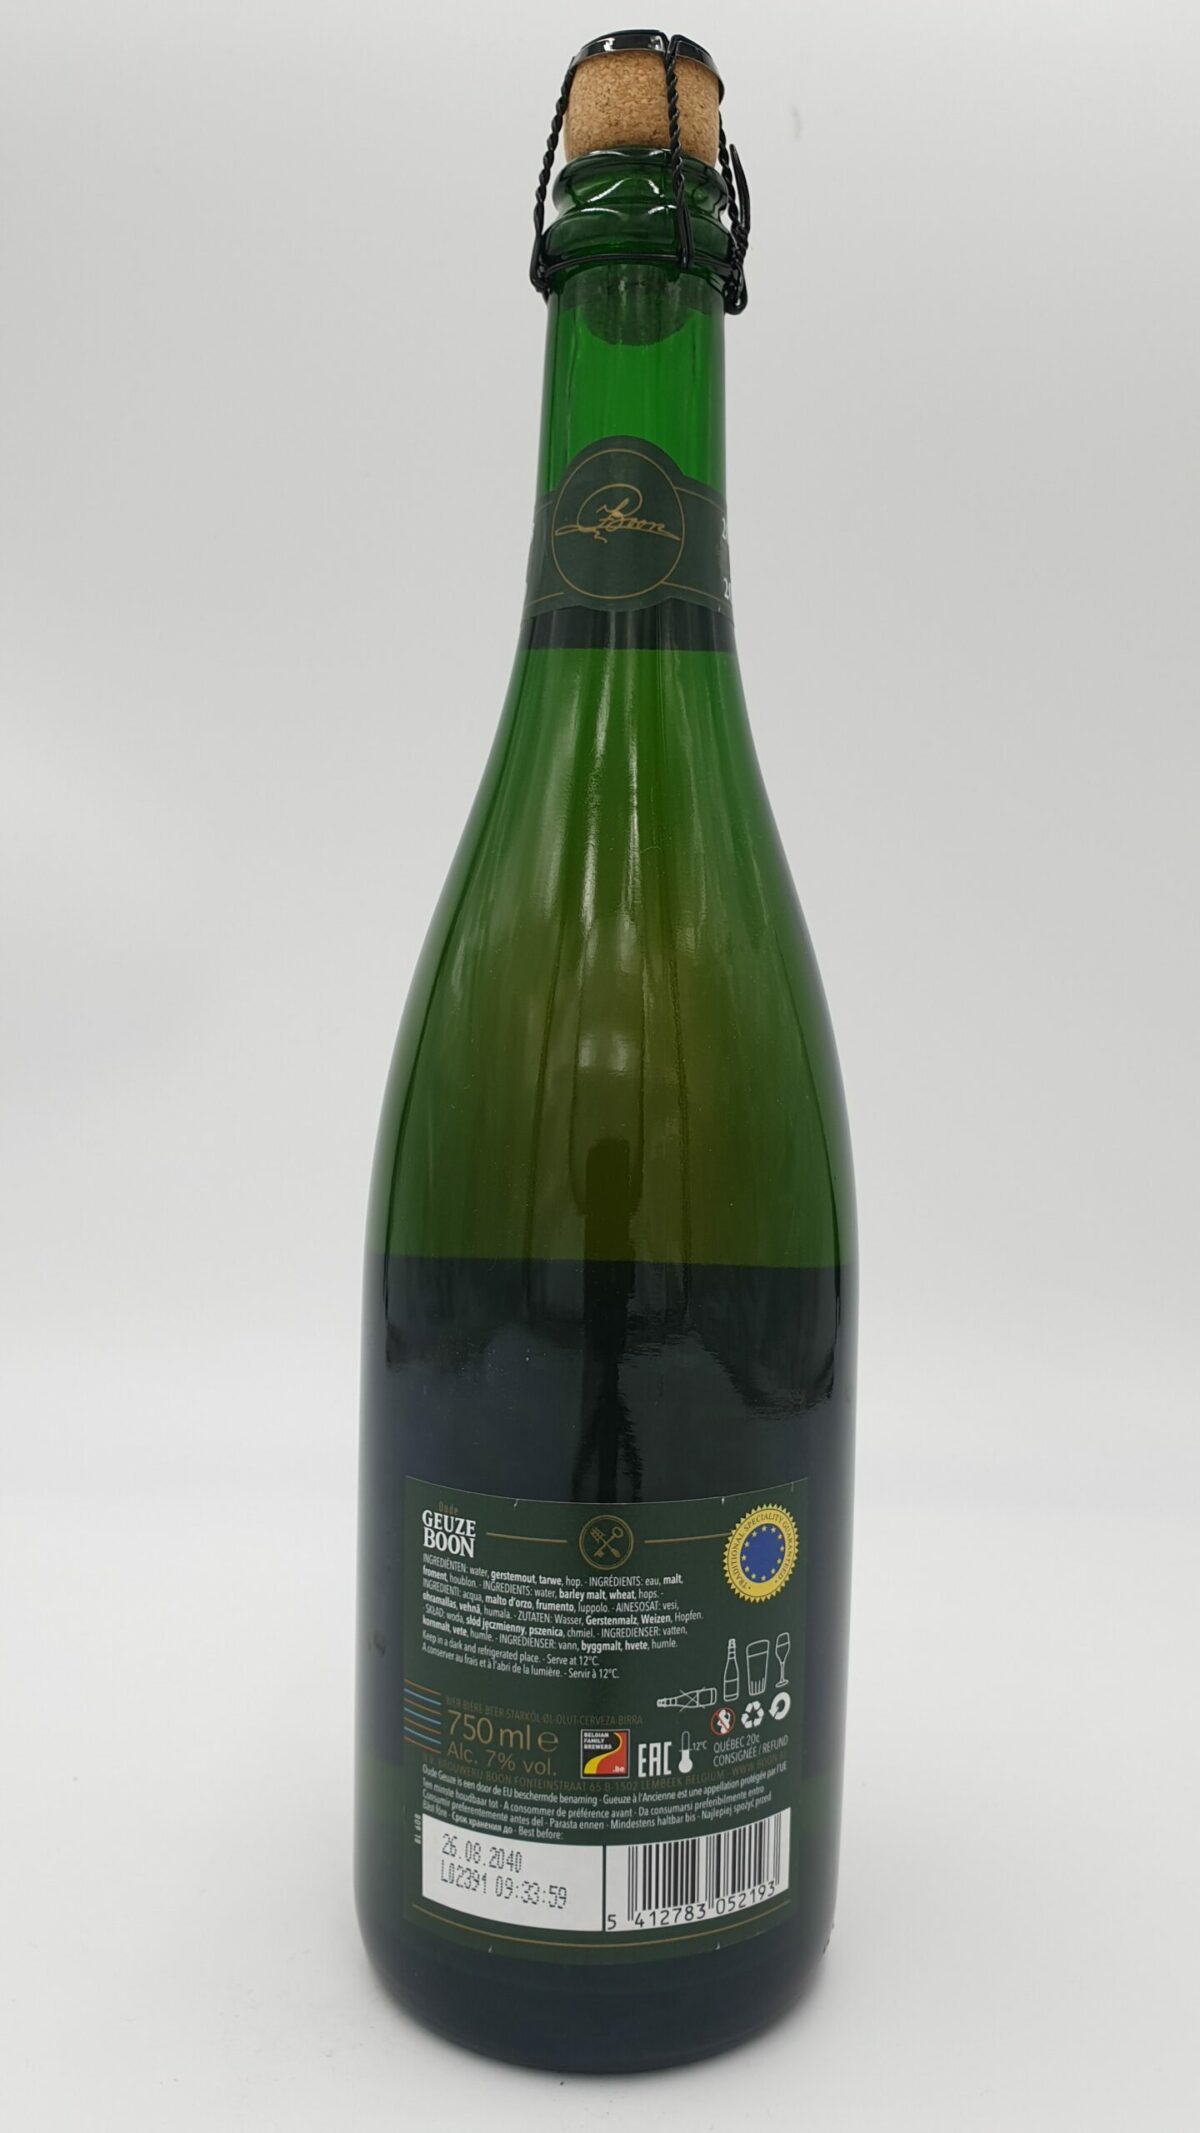 boon oude geuze new label 2018-2019